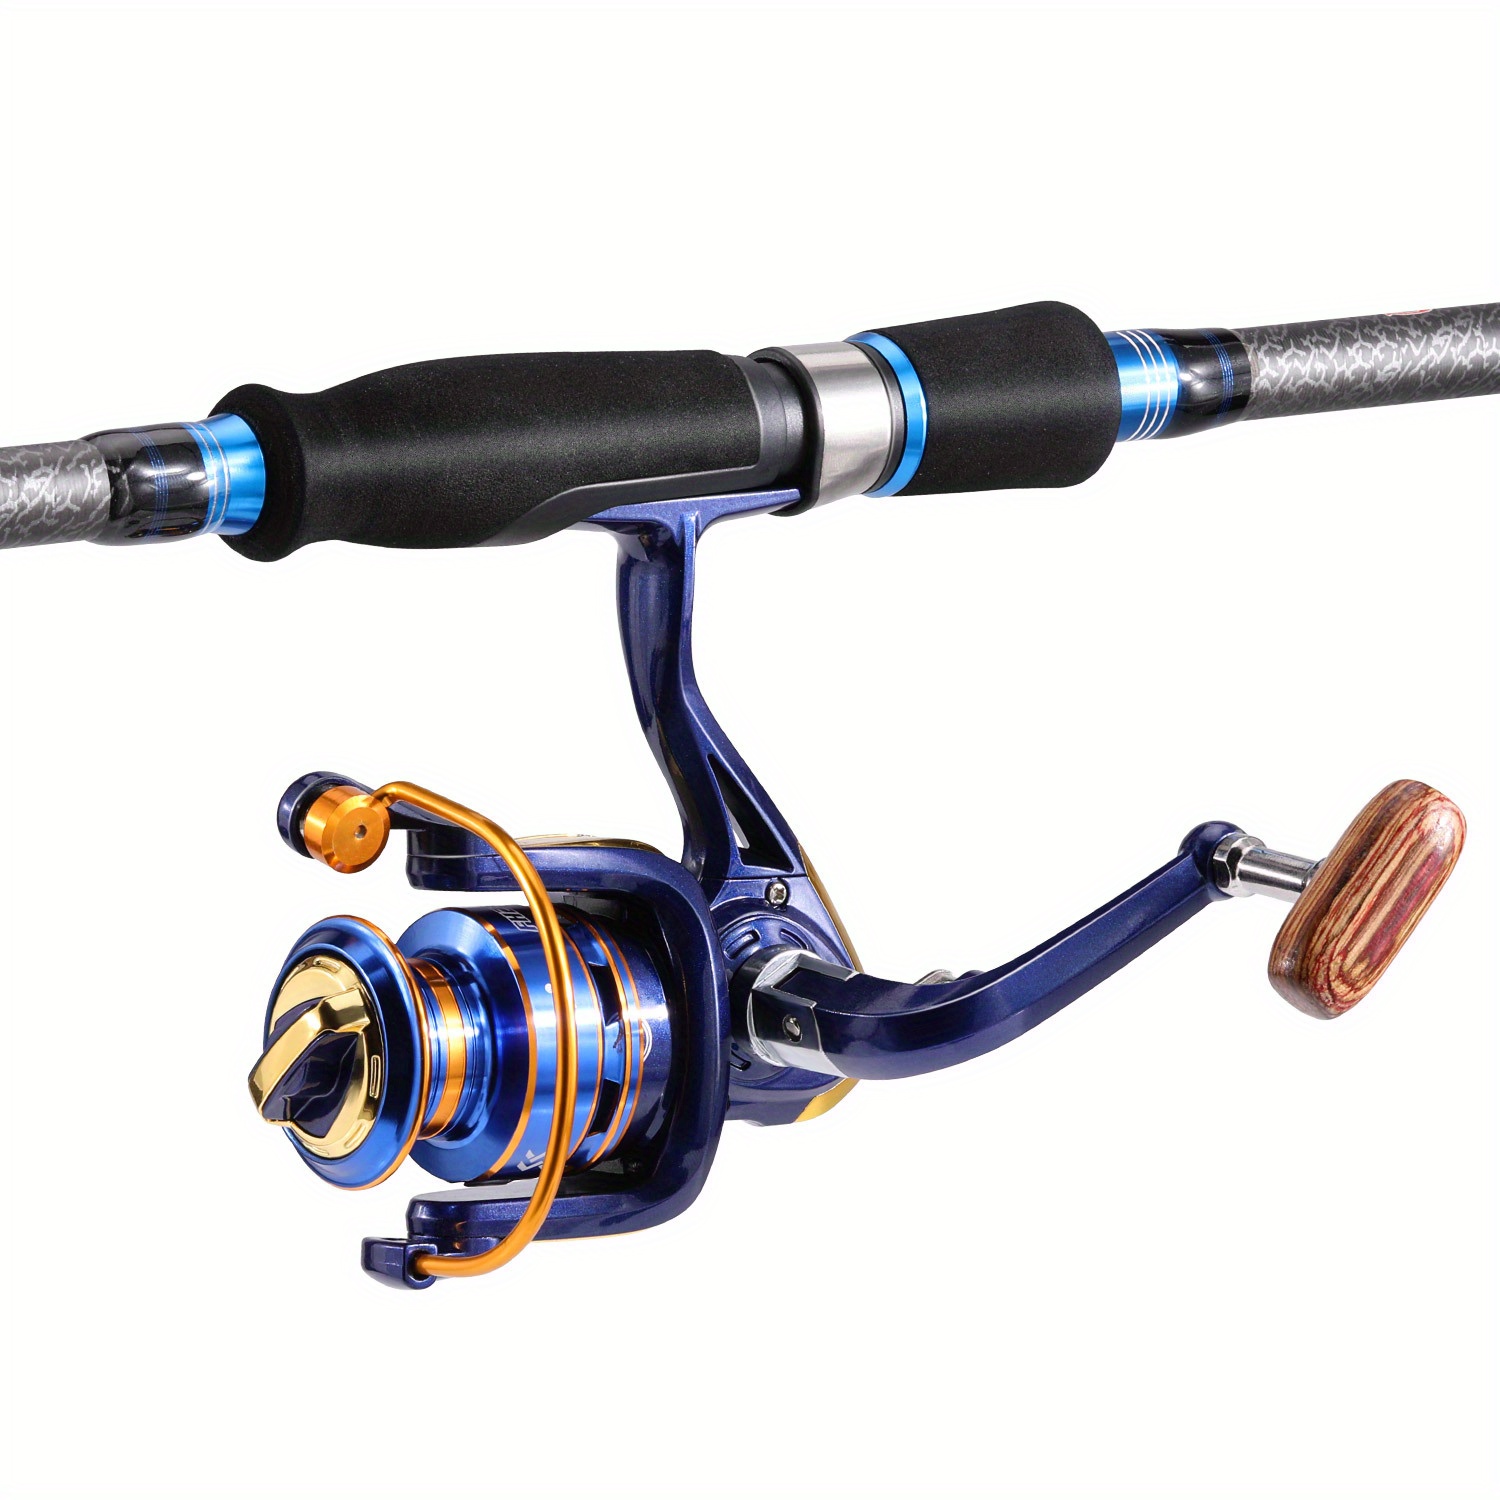 Sougayilang Spinning Rod Combo Fishing Pole Spinning Reel Ultralight Set, Size: A: 6'with 1000